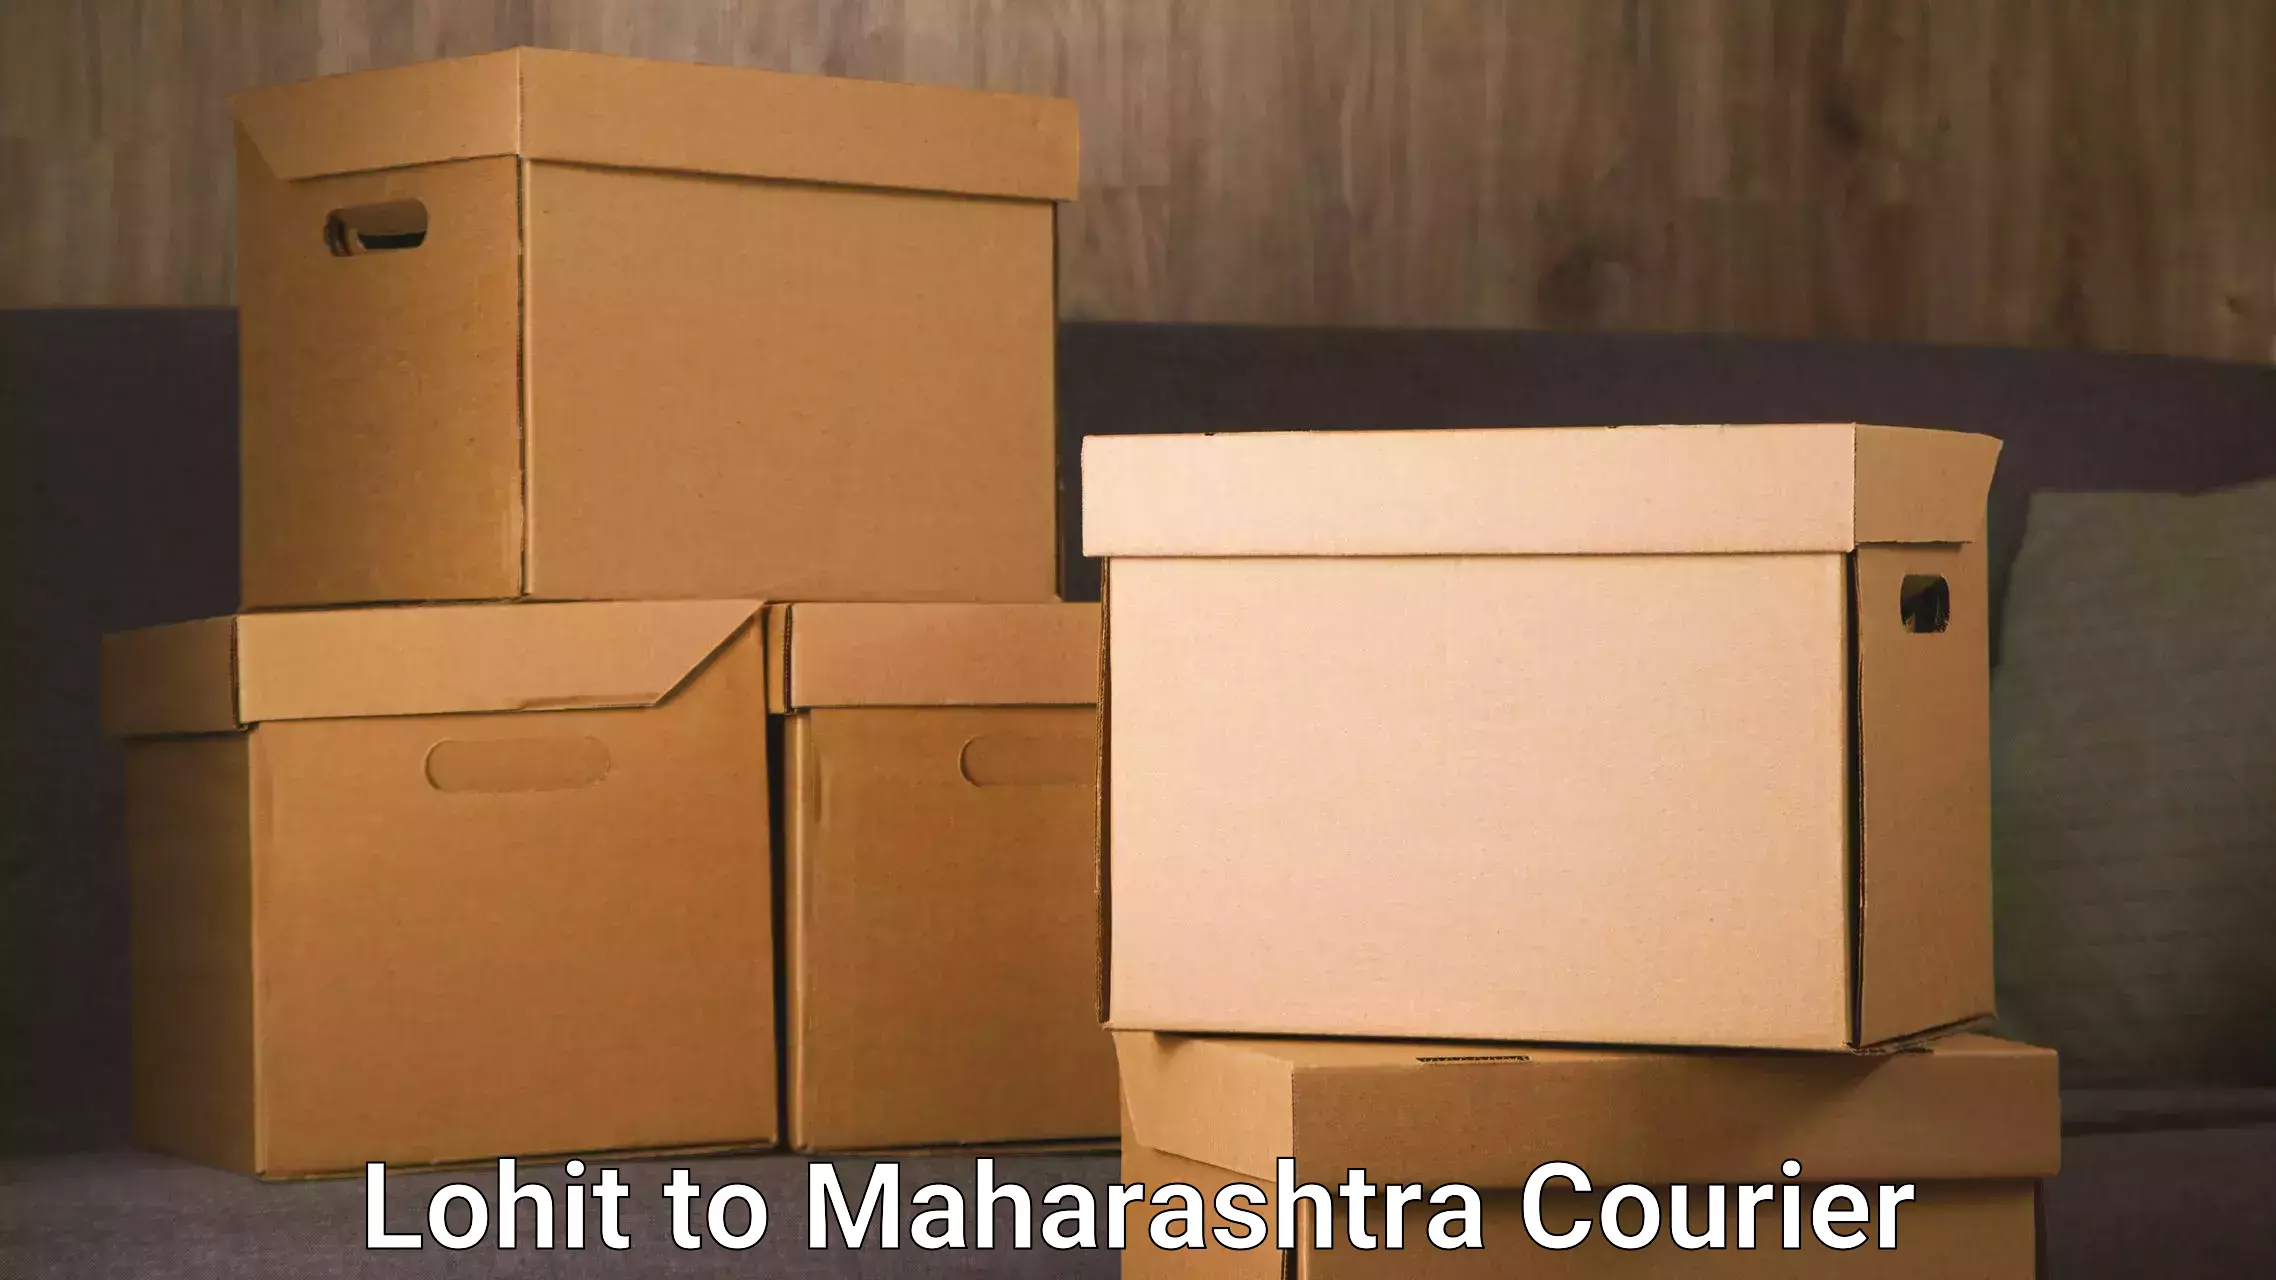 Multi-service courier options in Lohit to IIIT Nagpur